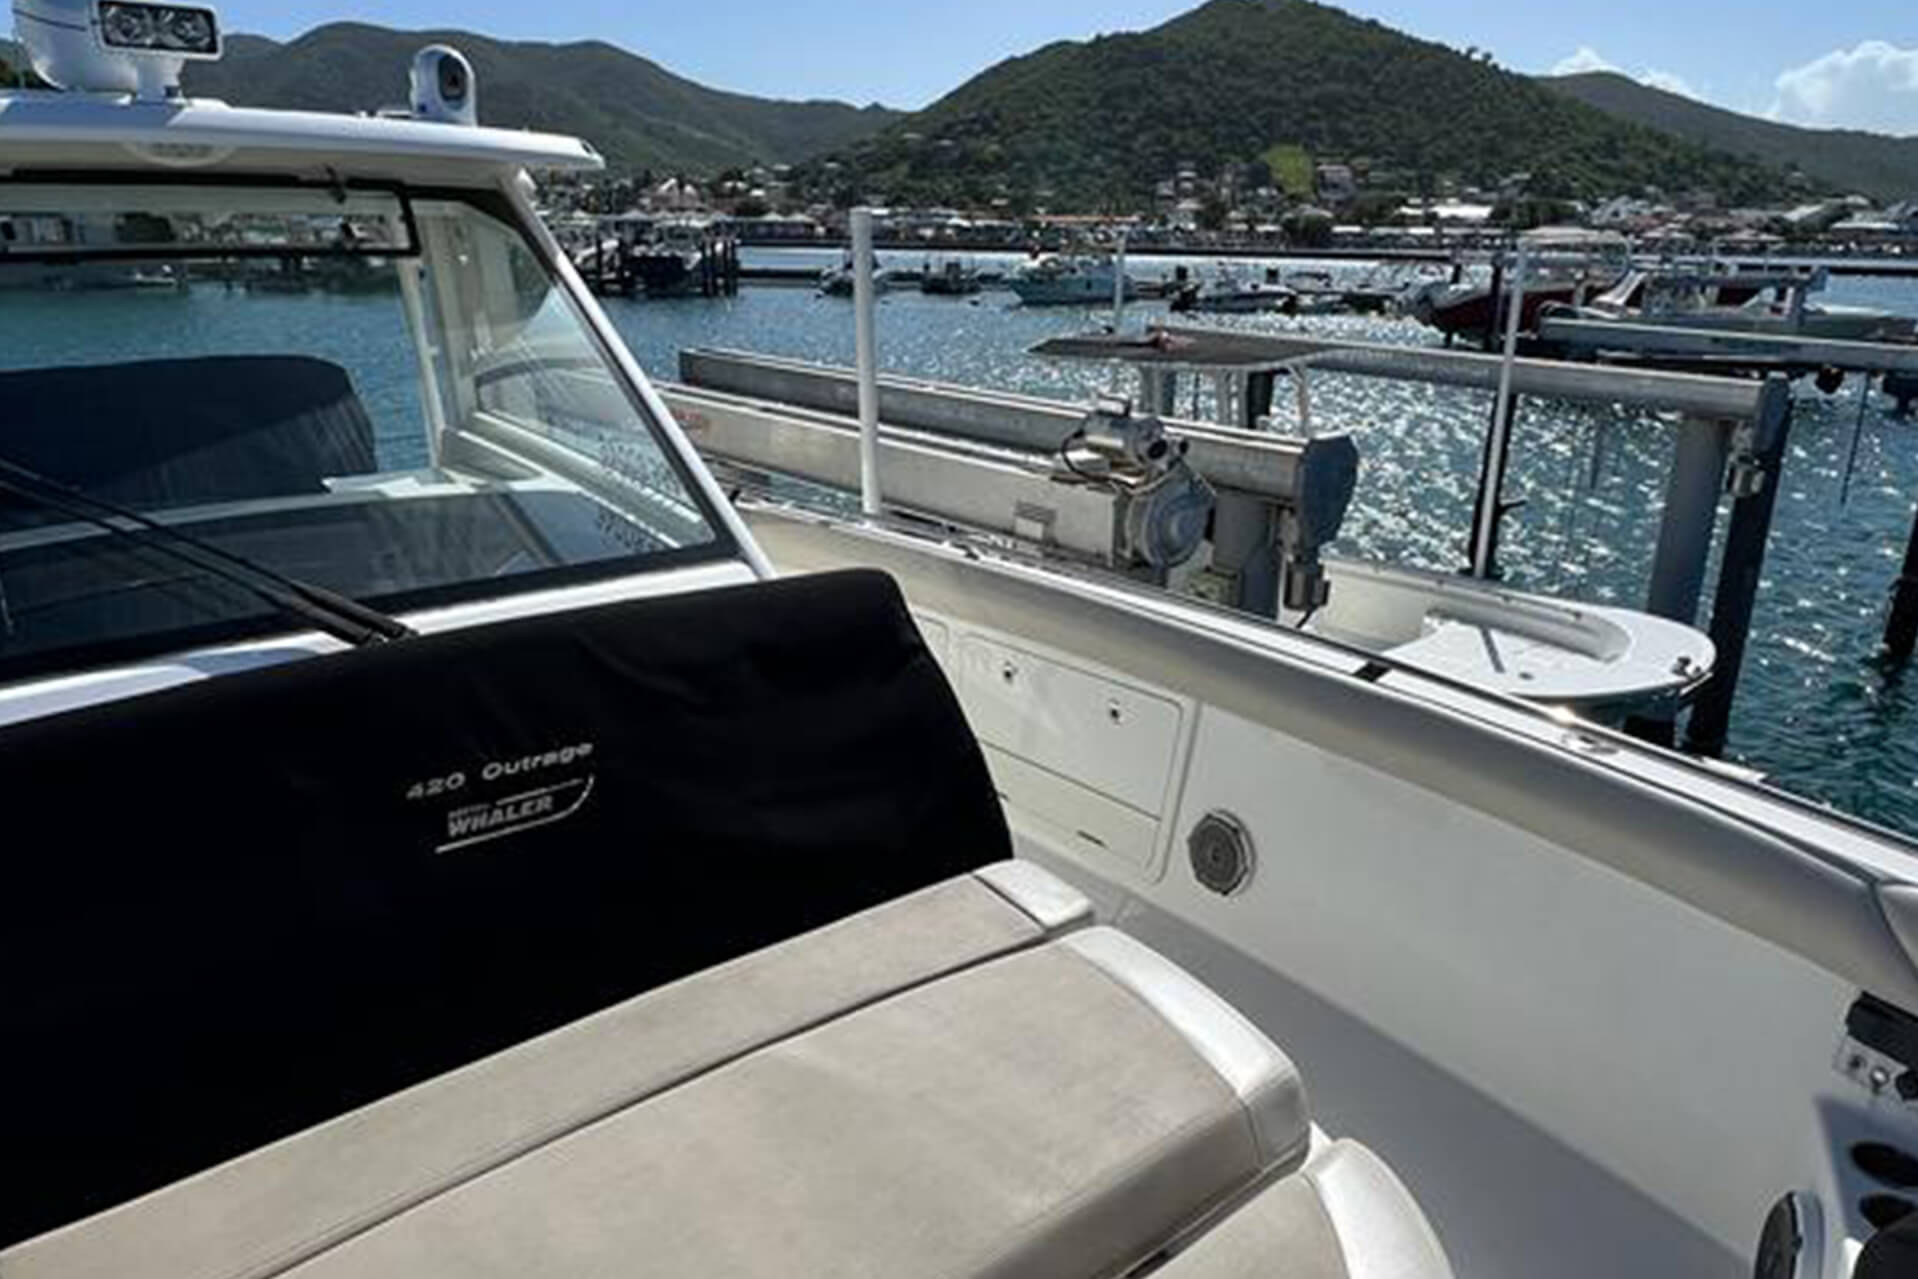 The Boston Whaler 43 is an elegantly designed yacht, with clean lines.